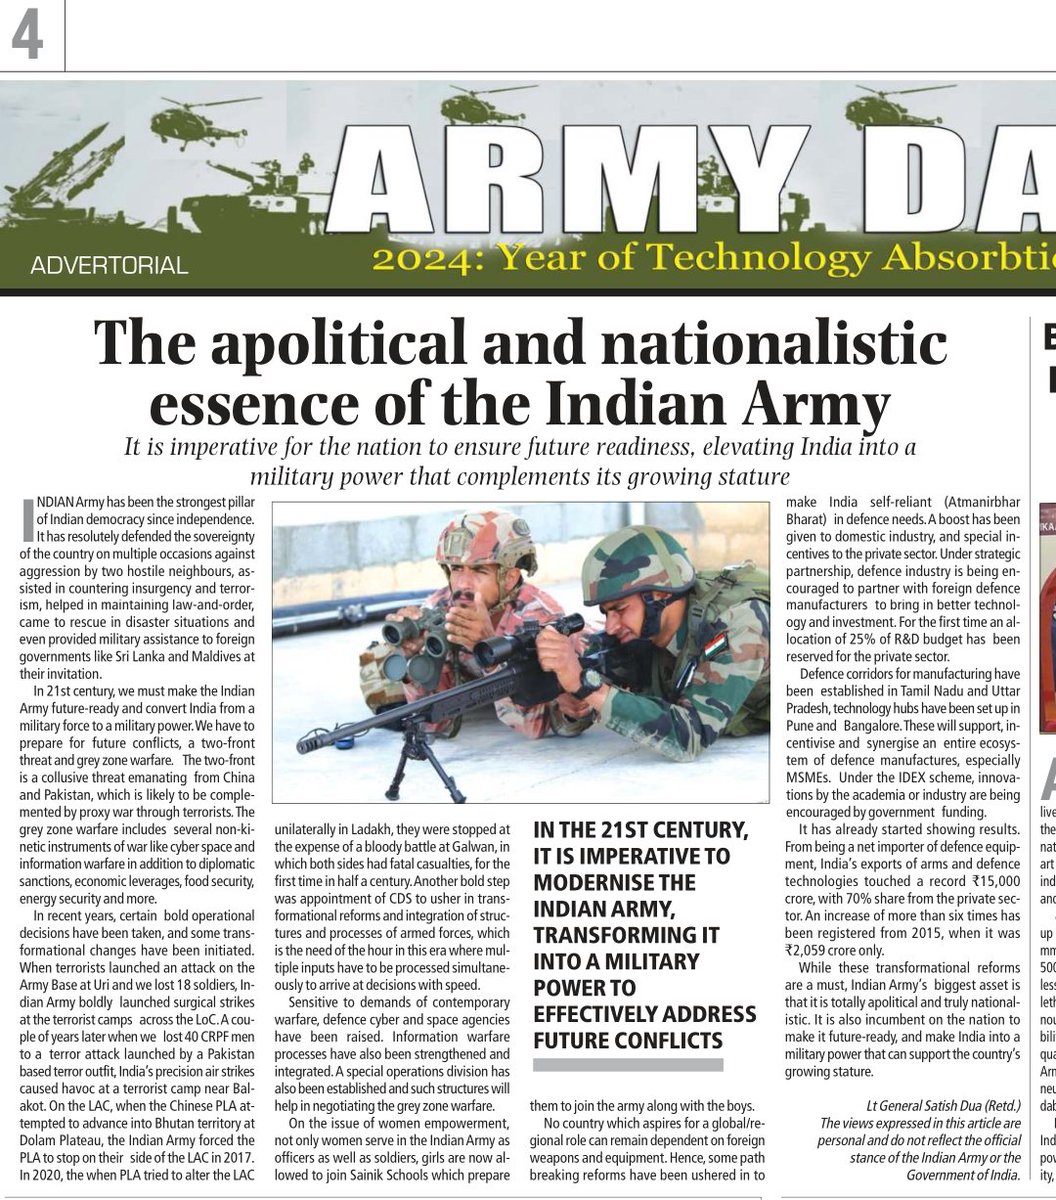 Army Day Greetings! Proud to have been a part of Indian Army for four decades. Proud to have served with the Indian soldiers who are ready to risk their lives everyday, proud to have formed strong bonds of brotherhood with officers & men. Read my article in Indian Express today